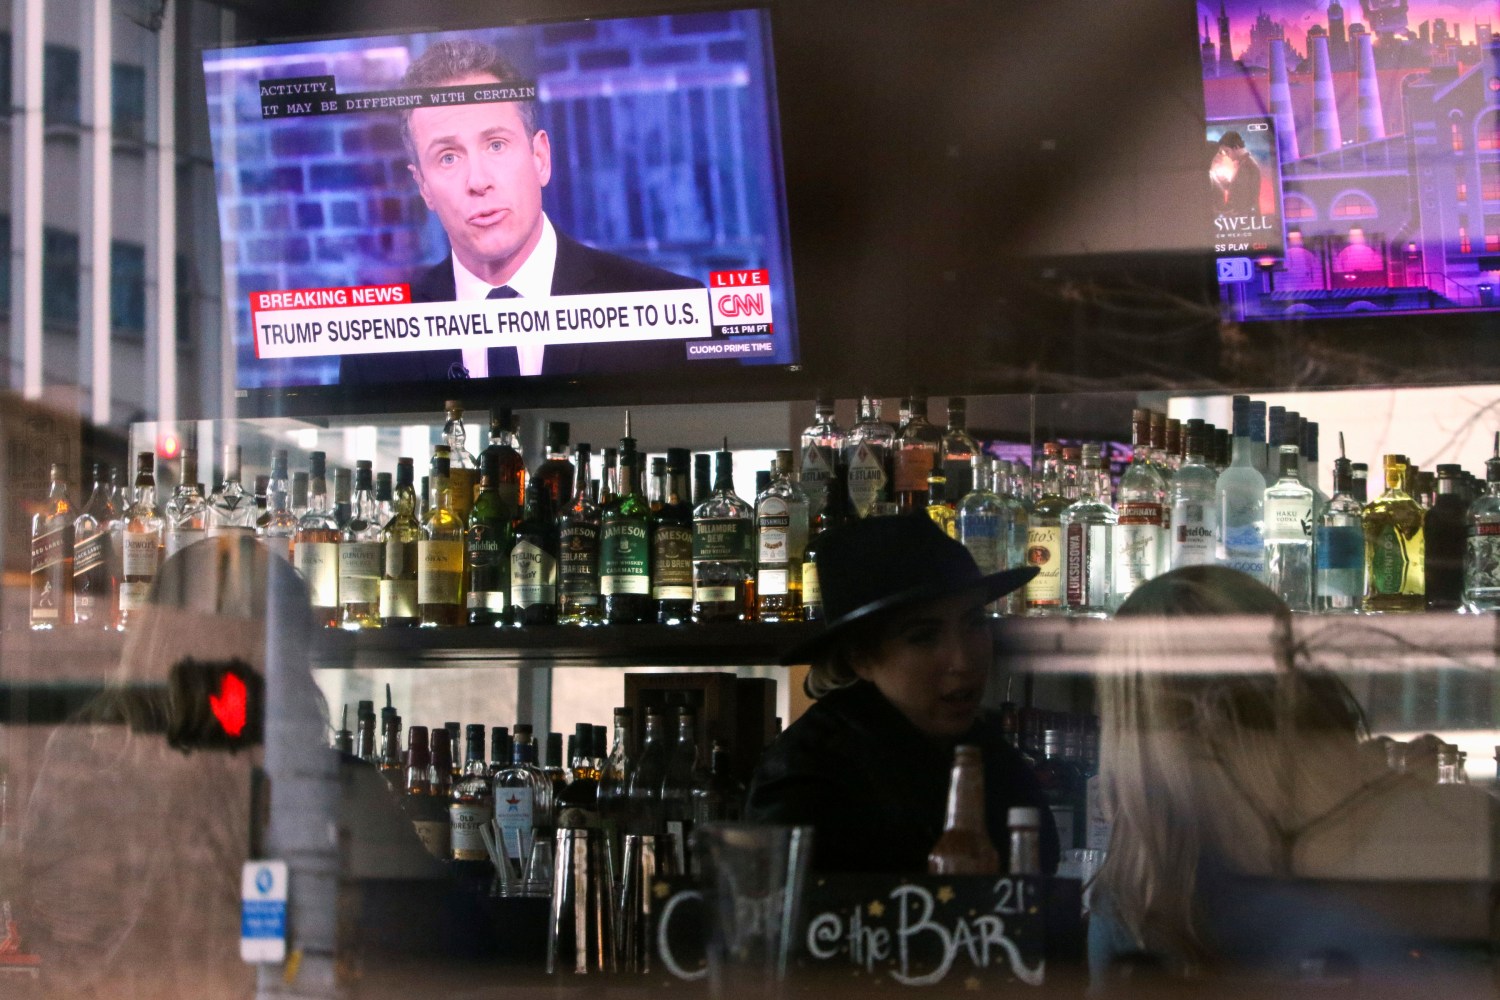 A CNN headline reading "Trump Suspends Travel From Europe to U.S." is pictured on the television in the bar at A Pizza Mart, in Seattle, Washington, U.S. March 11, 2020. REUTERS/Jason Redmond